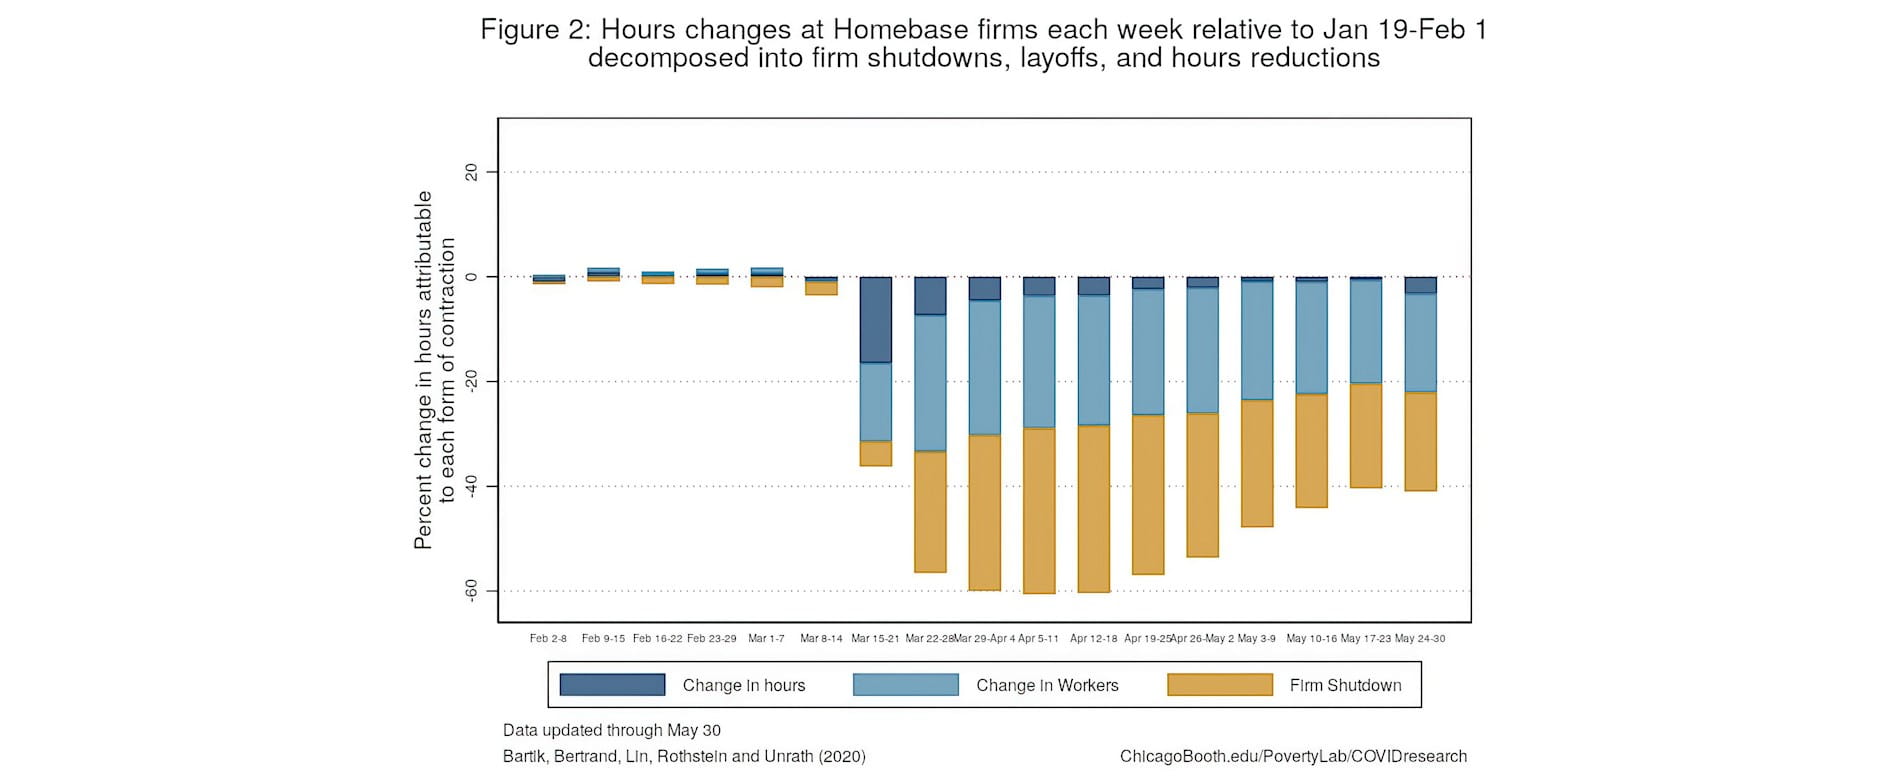 Figure 2: Hours changes at Homebase firms each week relative to Jan 19-Feb 1